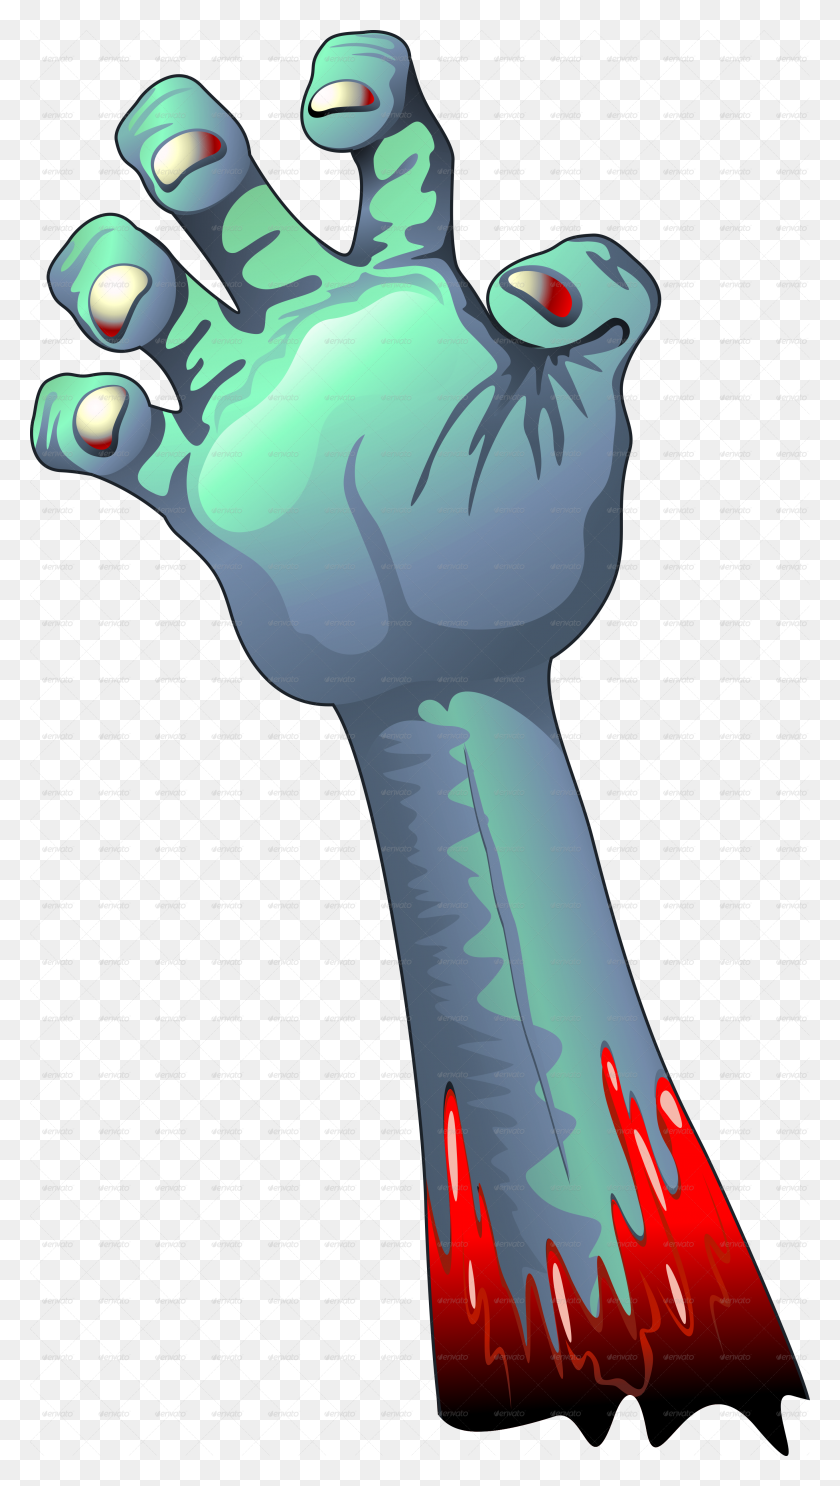 2735x5001 Zombie Clipart Creative Commons - Zombie Hand Clipart